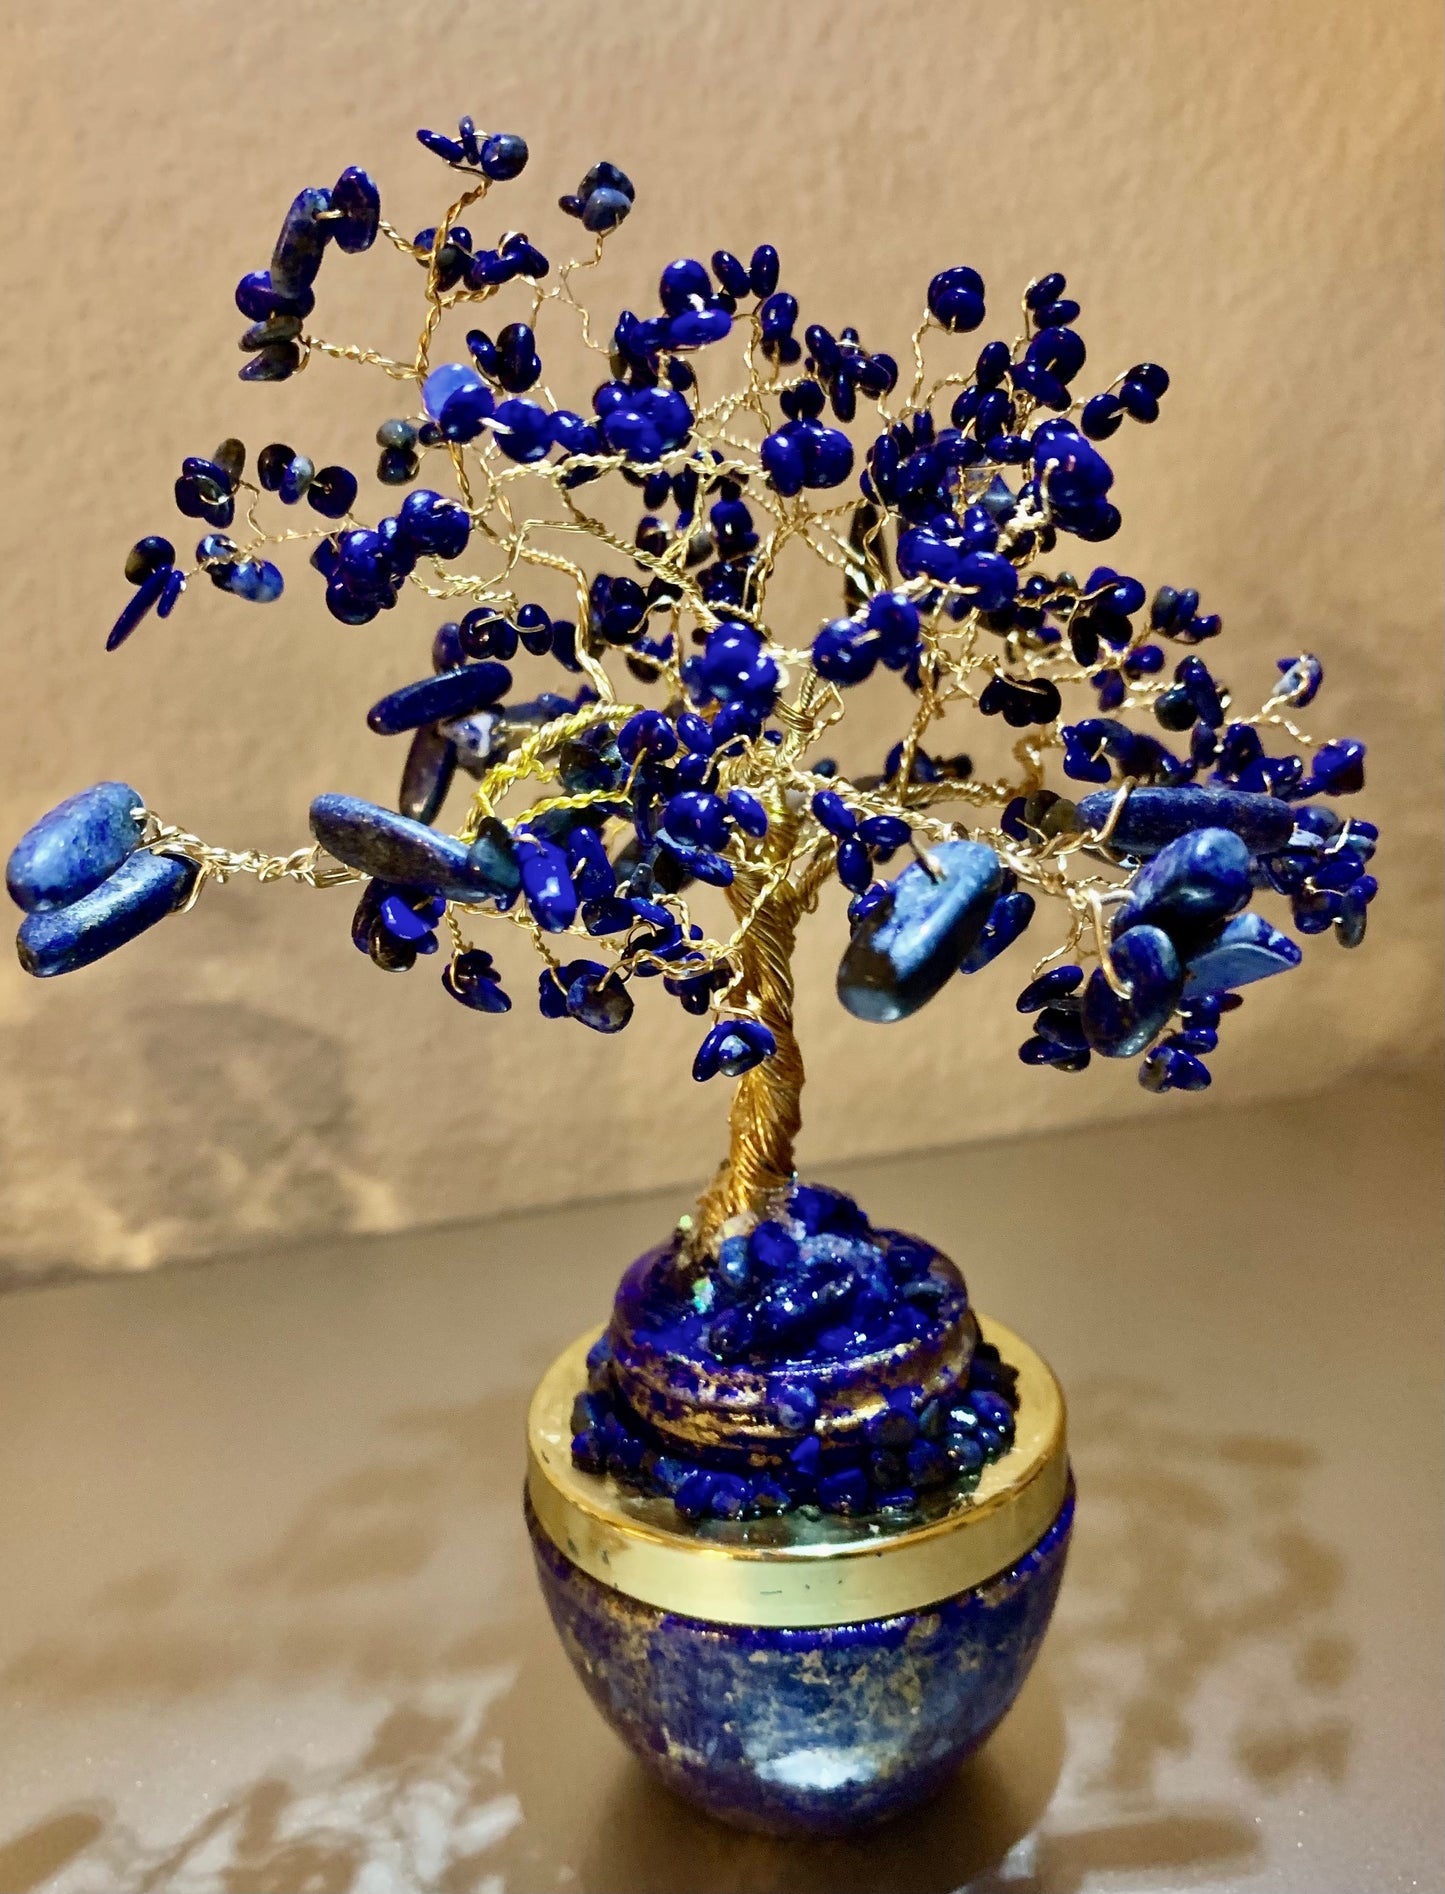 Handmade Lapis Lazuli and Sodalite 8" Gemstone Tree Sculpture in a Painted Glass Pot by Sharmaine Rayner